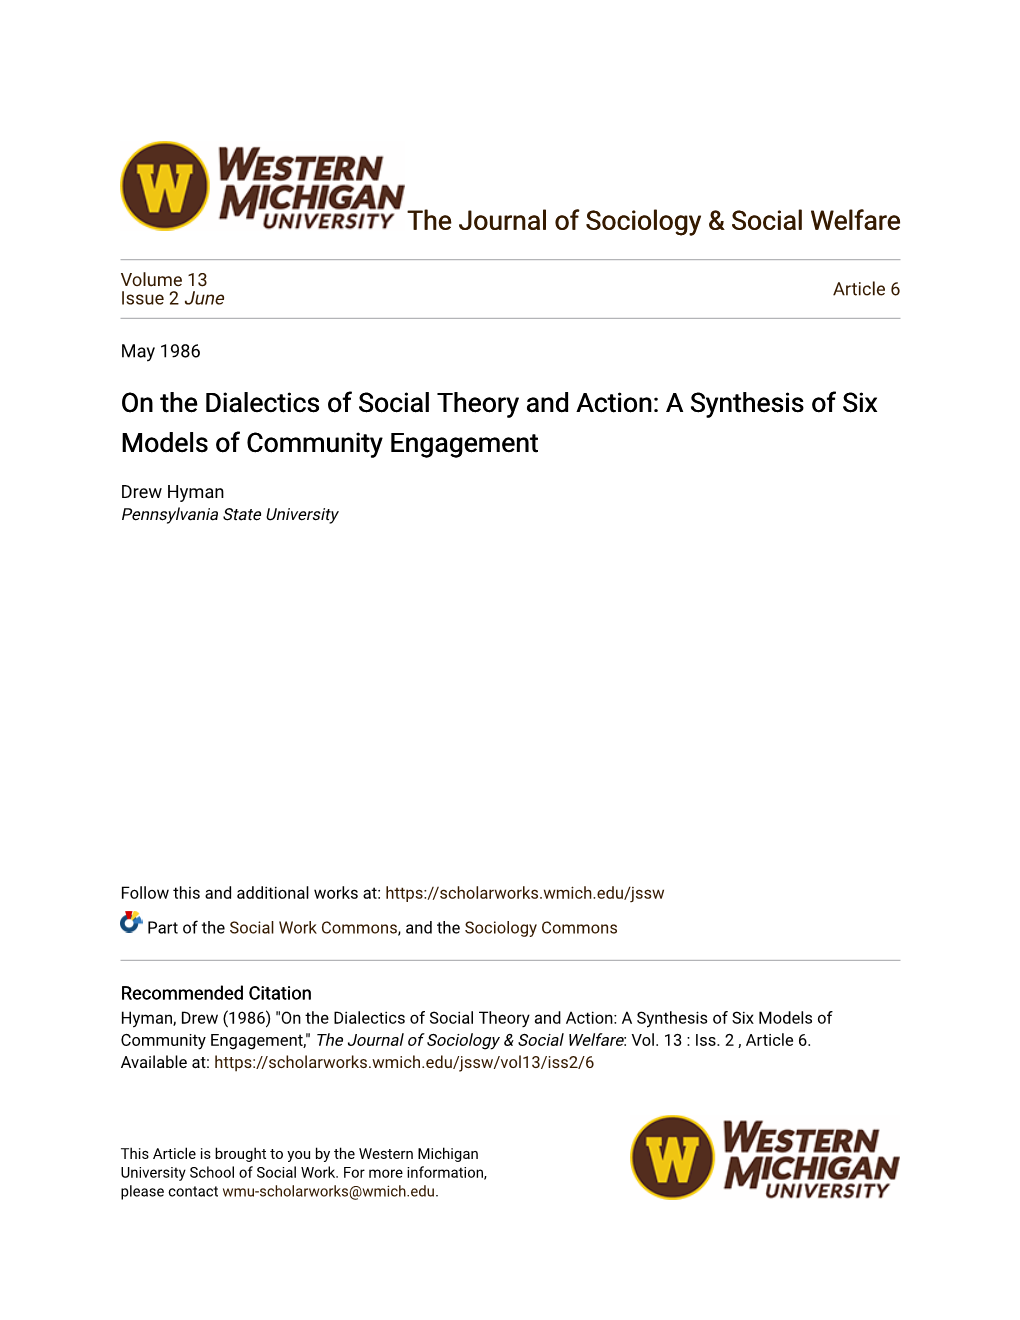 On the Dialectics of Social Theory and Action: a Synthesis of Six Models of Community Engagement